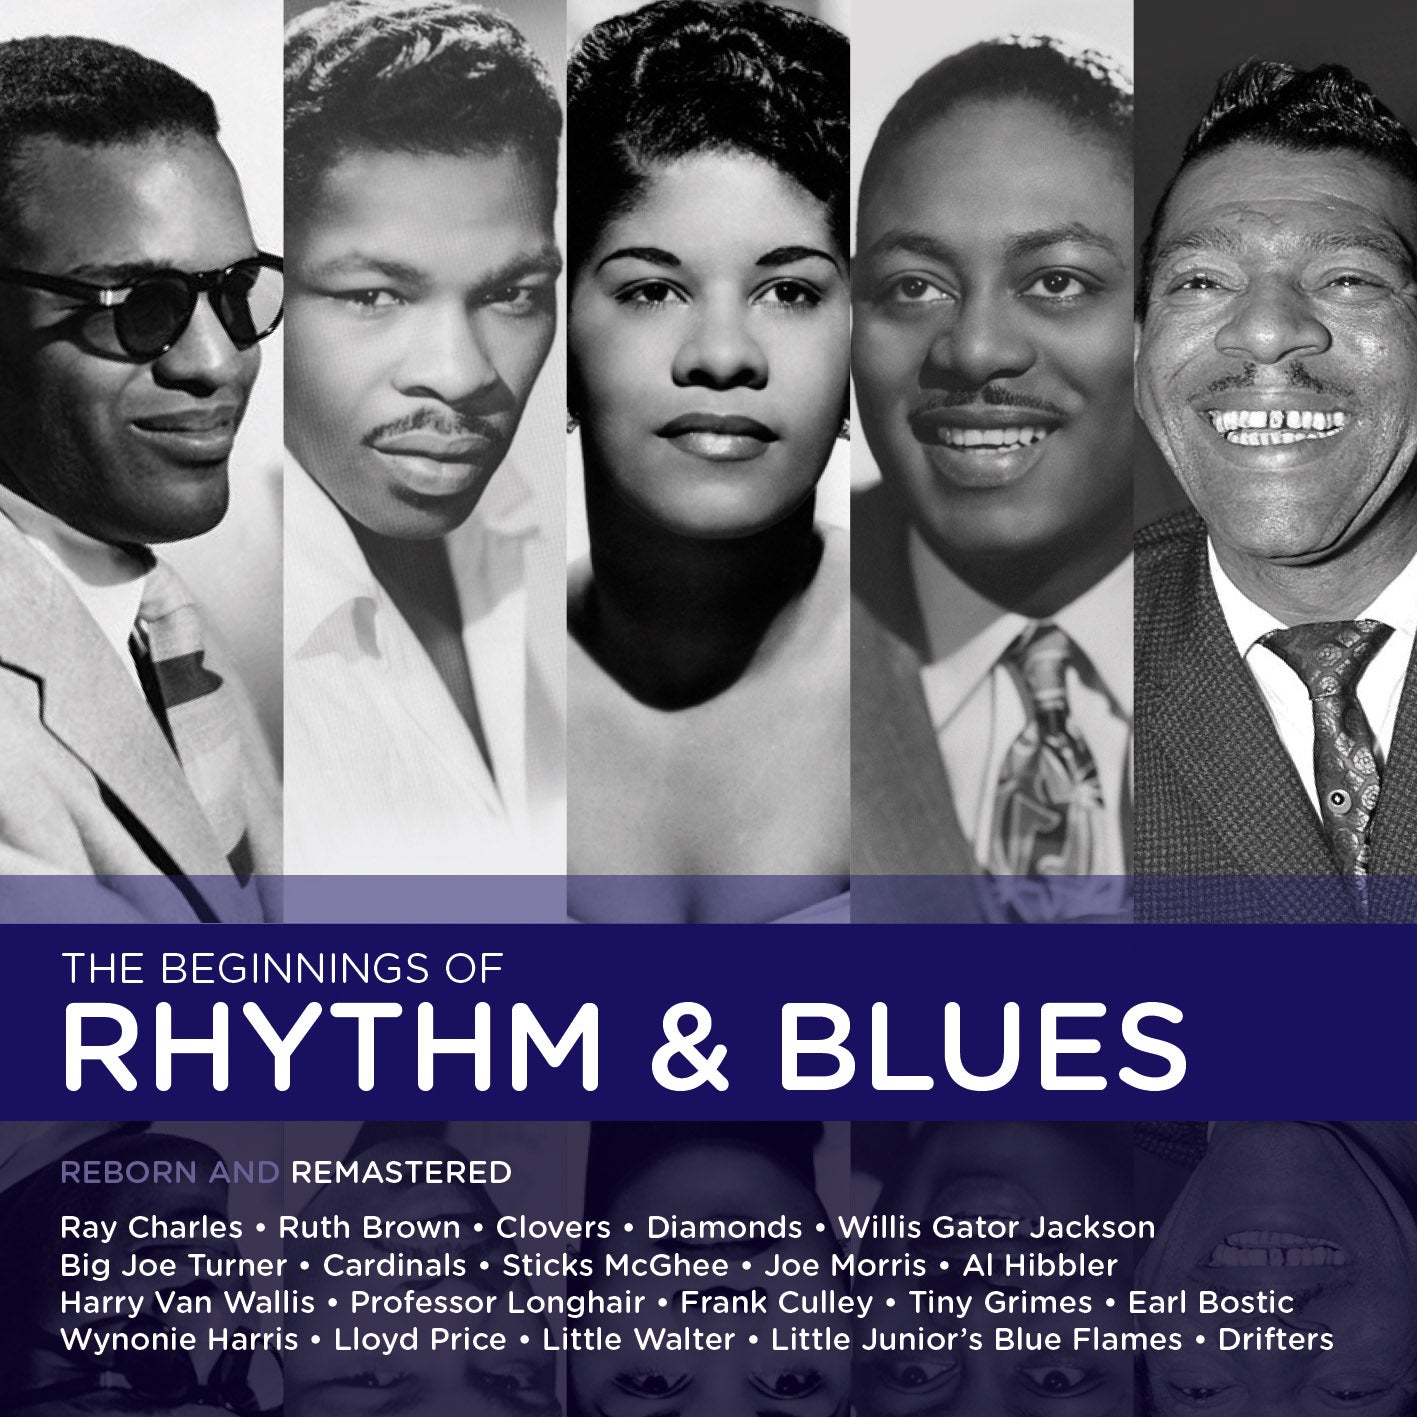 VARIOUS ARTISTS - HALL OF FAME:  THE BEGINNINGS OF RHYTHM & BLUES